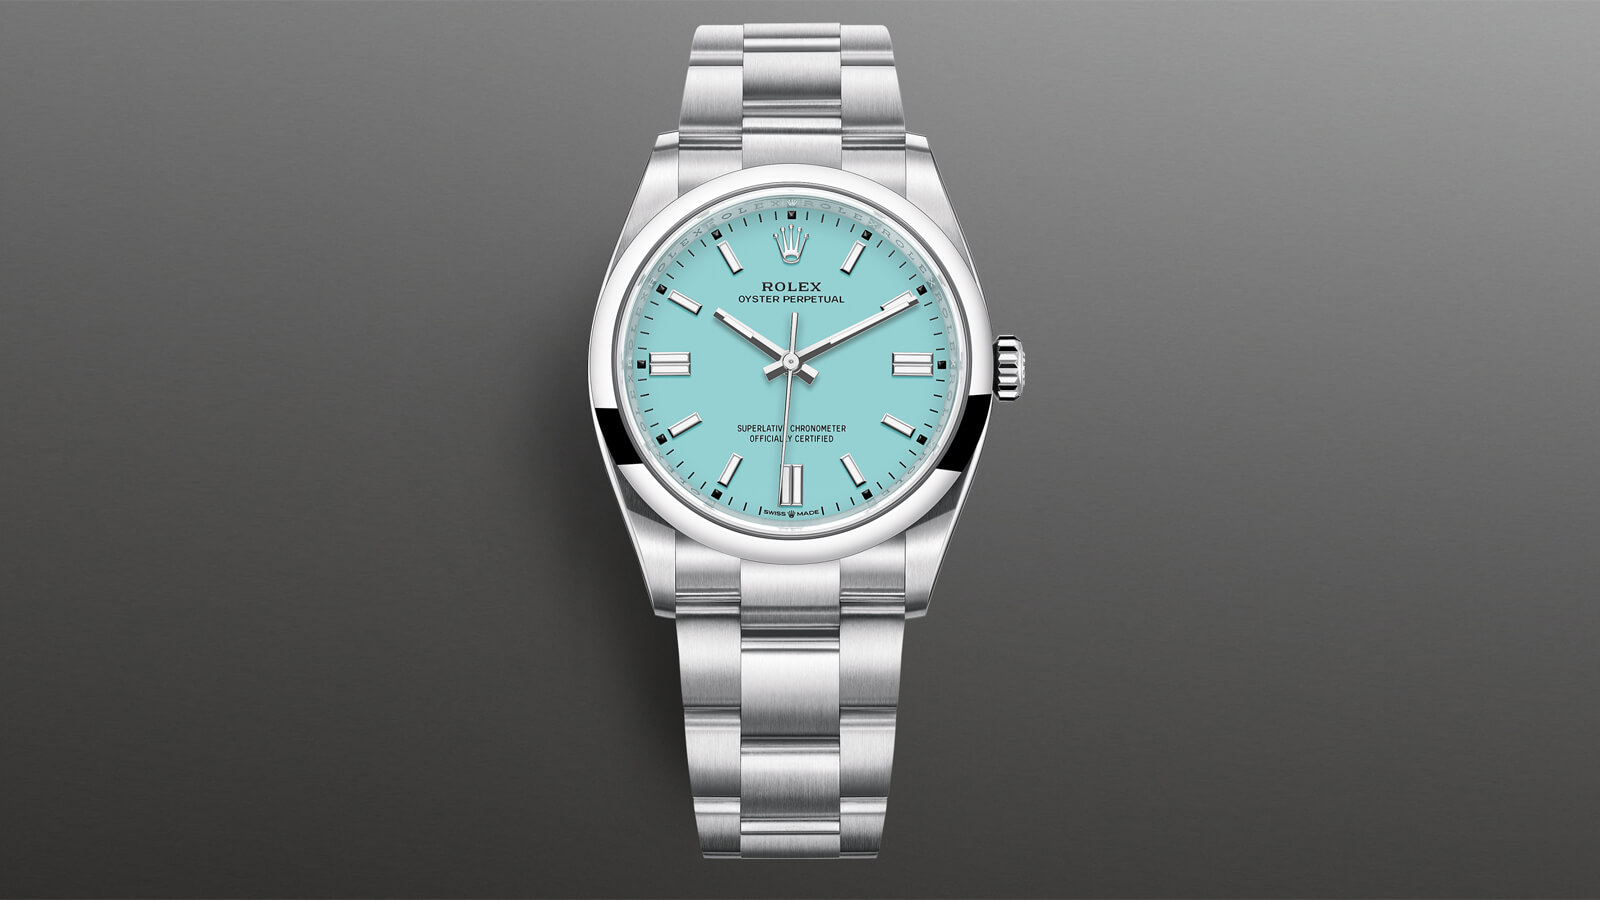  Rolex Oyster Perpetual 36